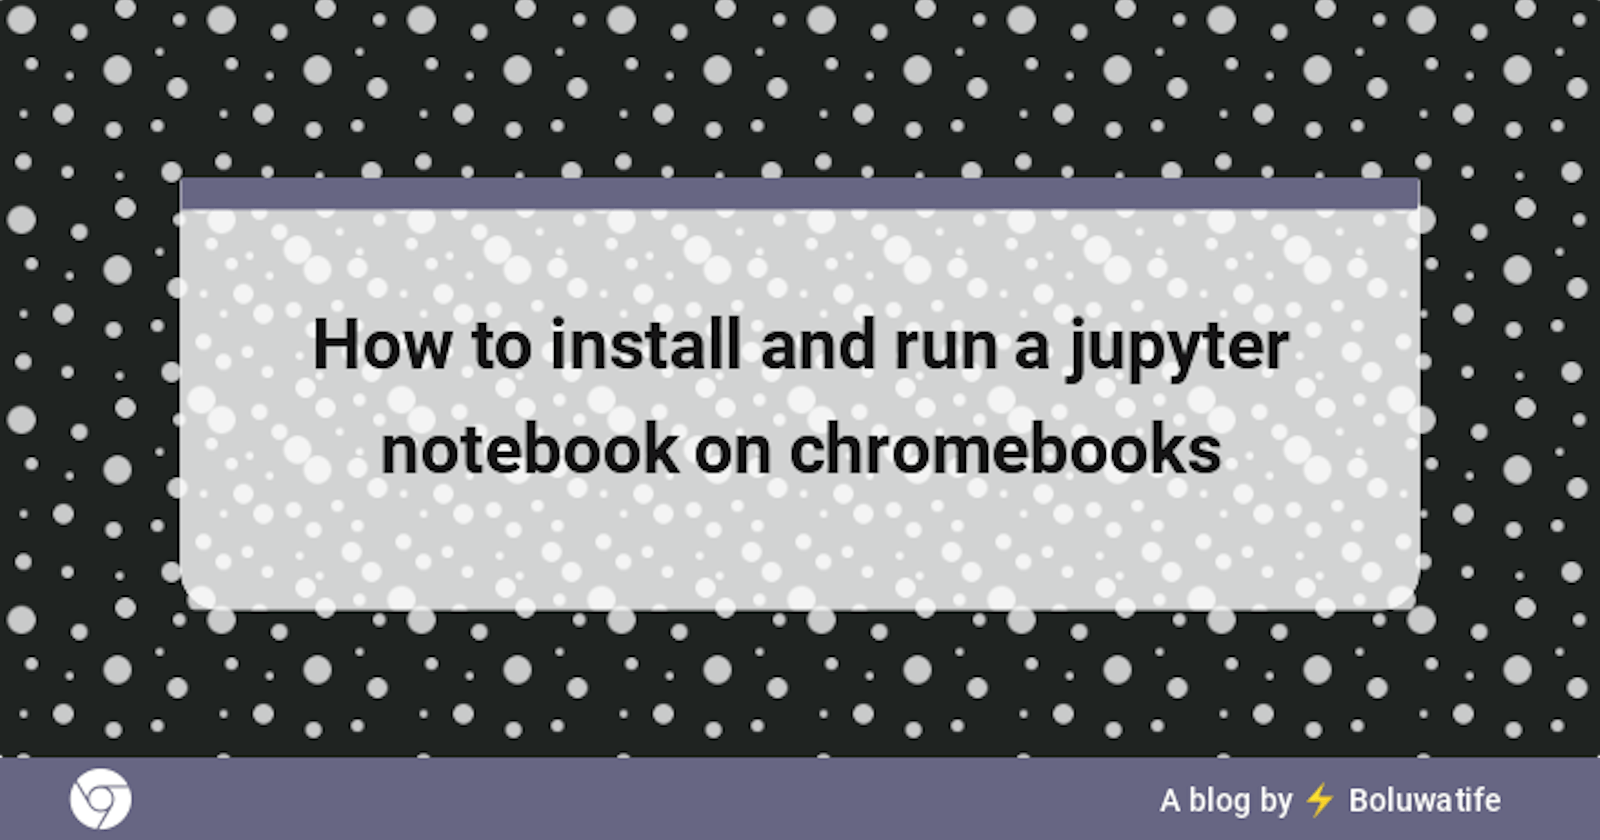 How to install and run a jupyter notebook on chromebooks